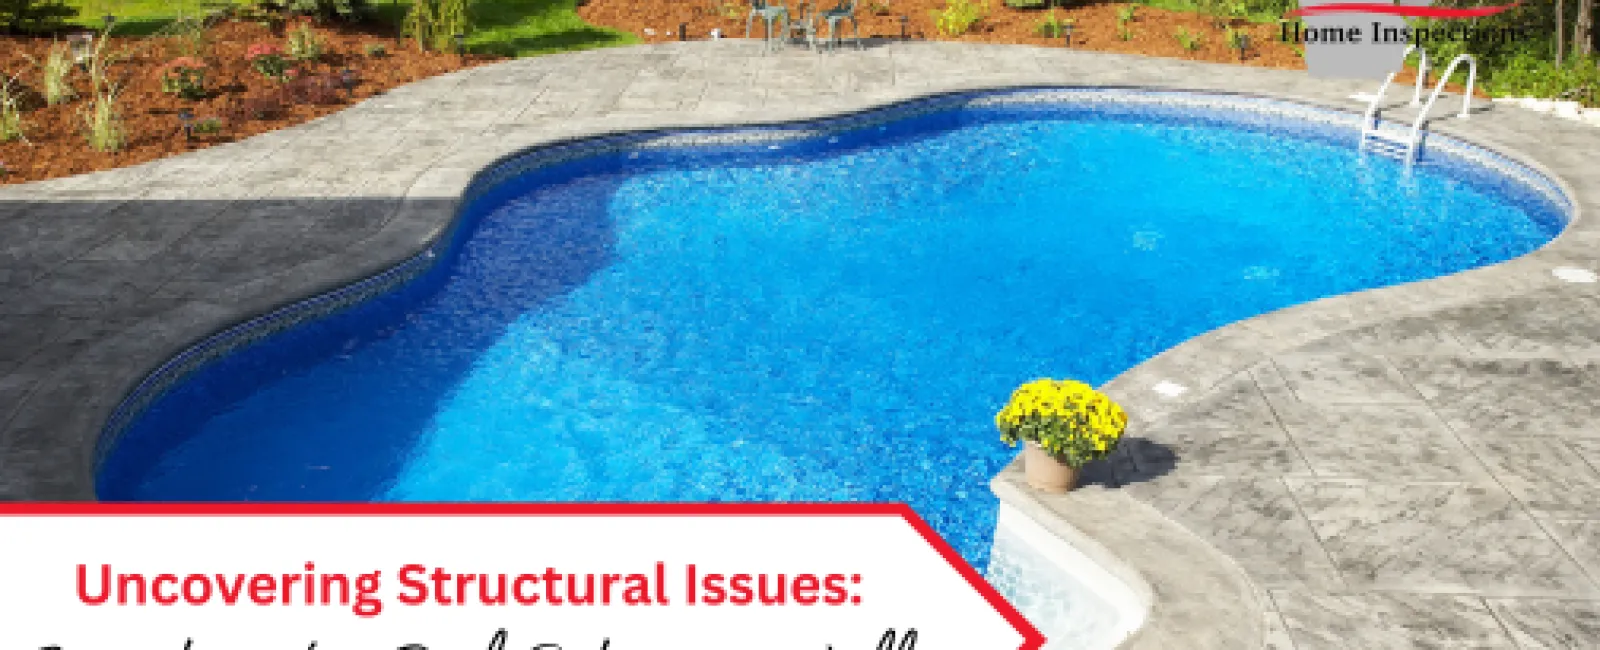 Uncovering Structural Issues: Joe M.'s Inspection of a Pool Retaining Wall